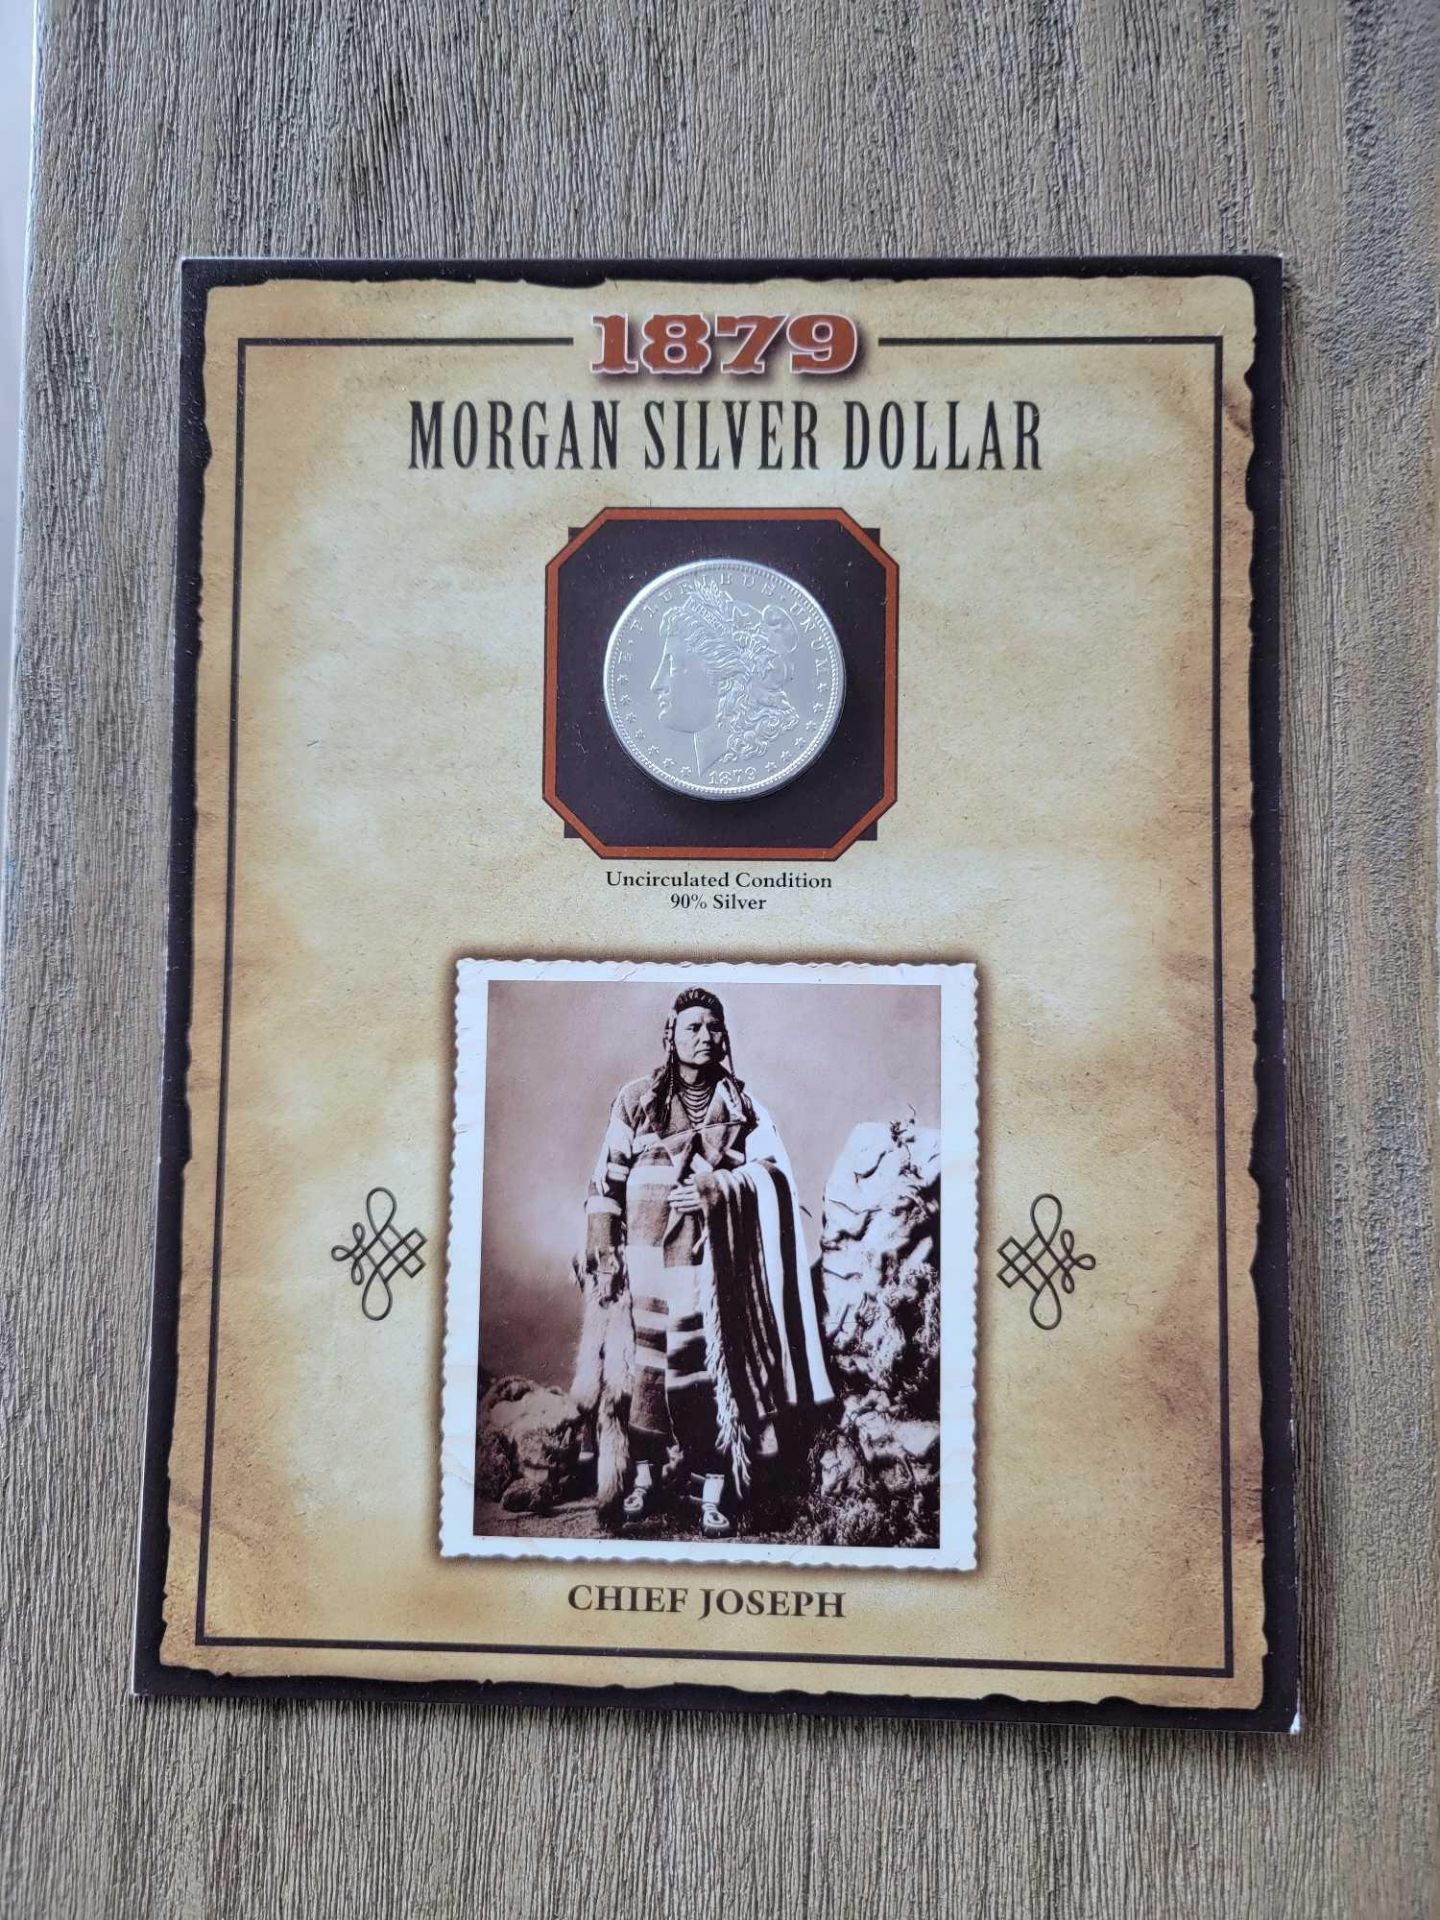 1879 Morgan Dollar with Chief Joseph Uncirculated Condition - Image 2 of 10